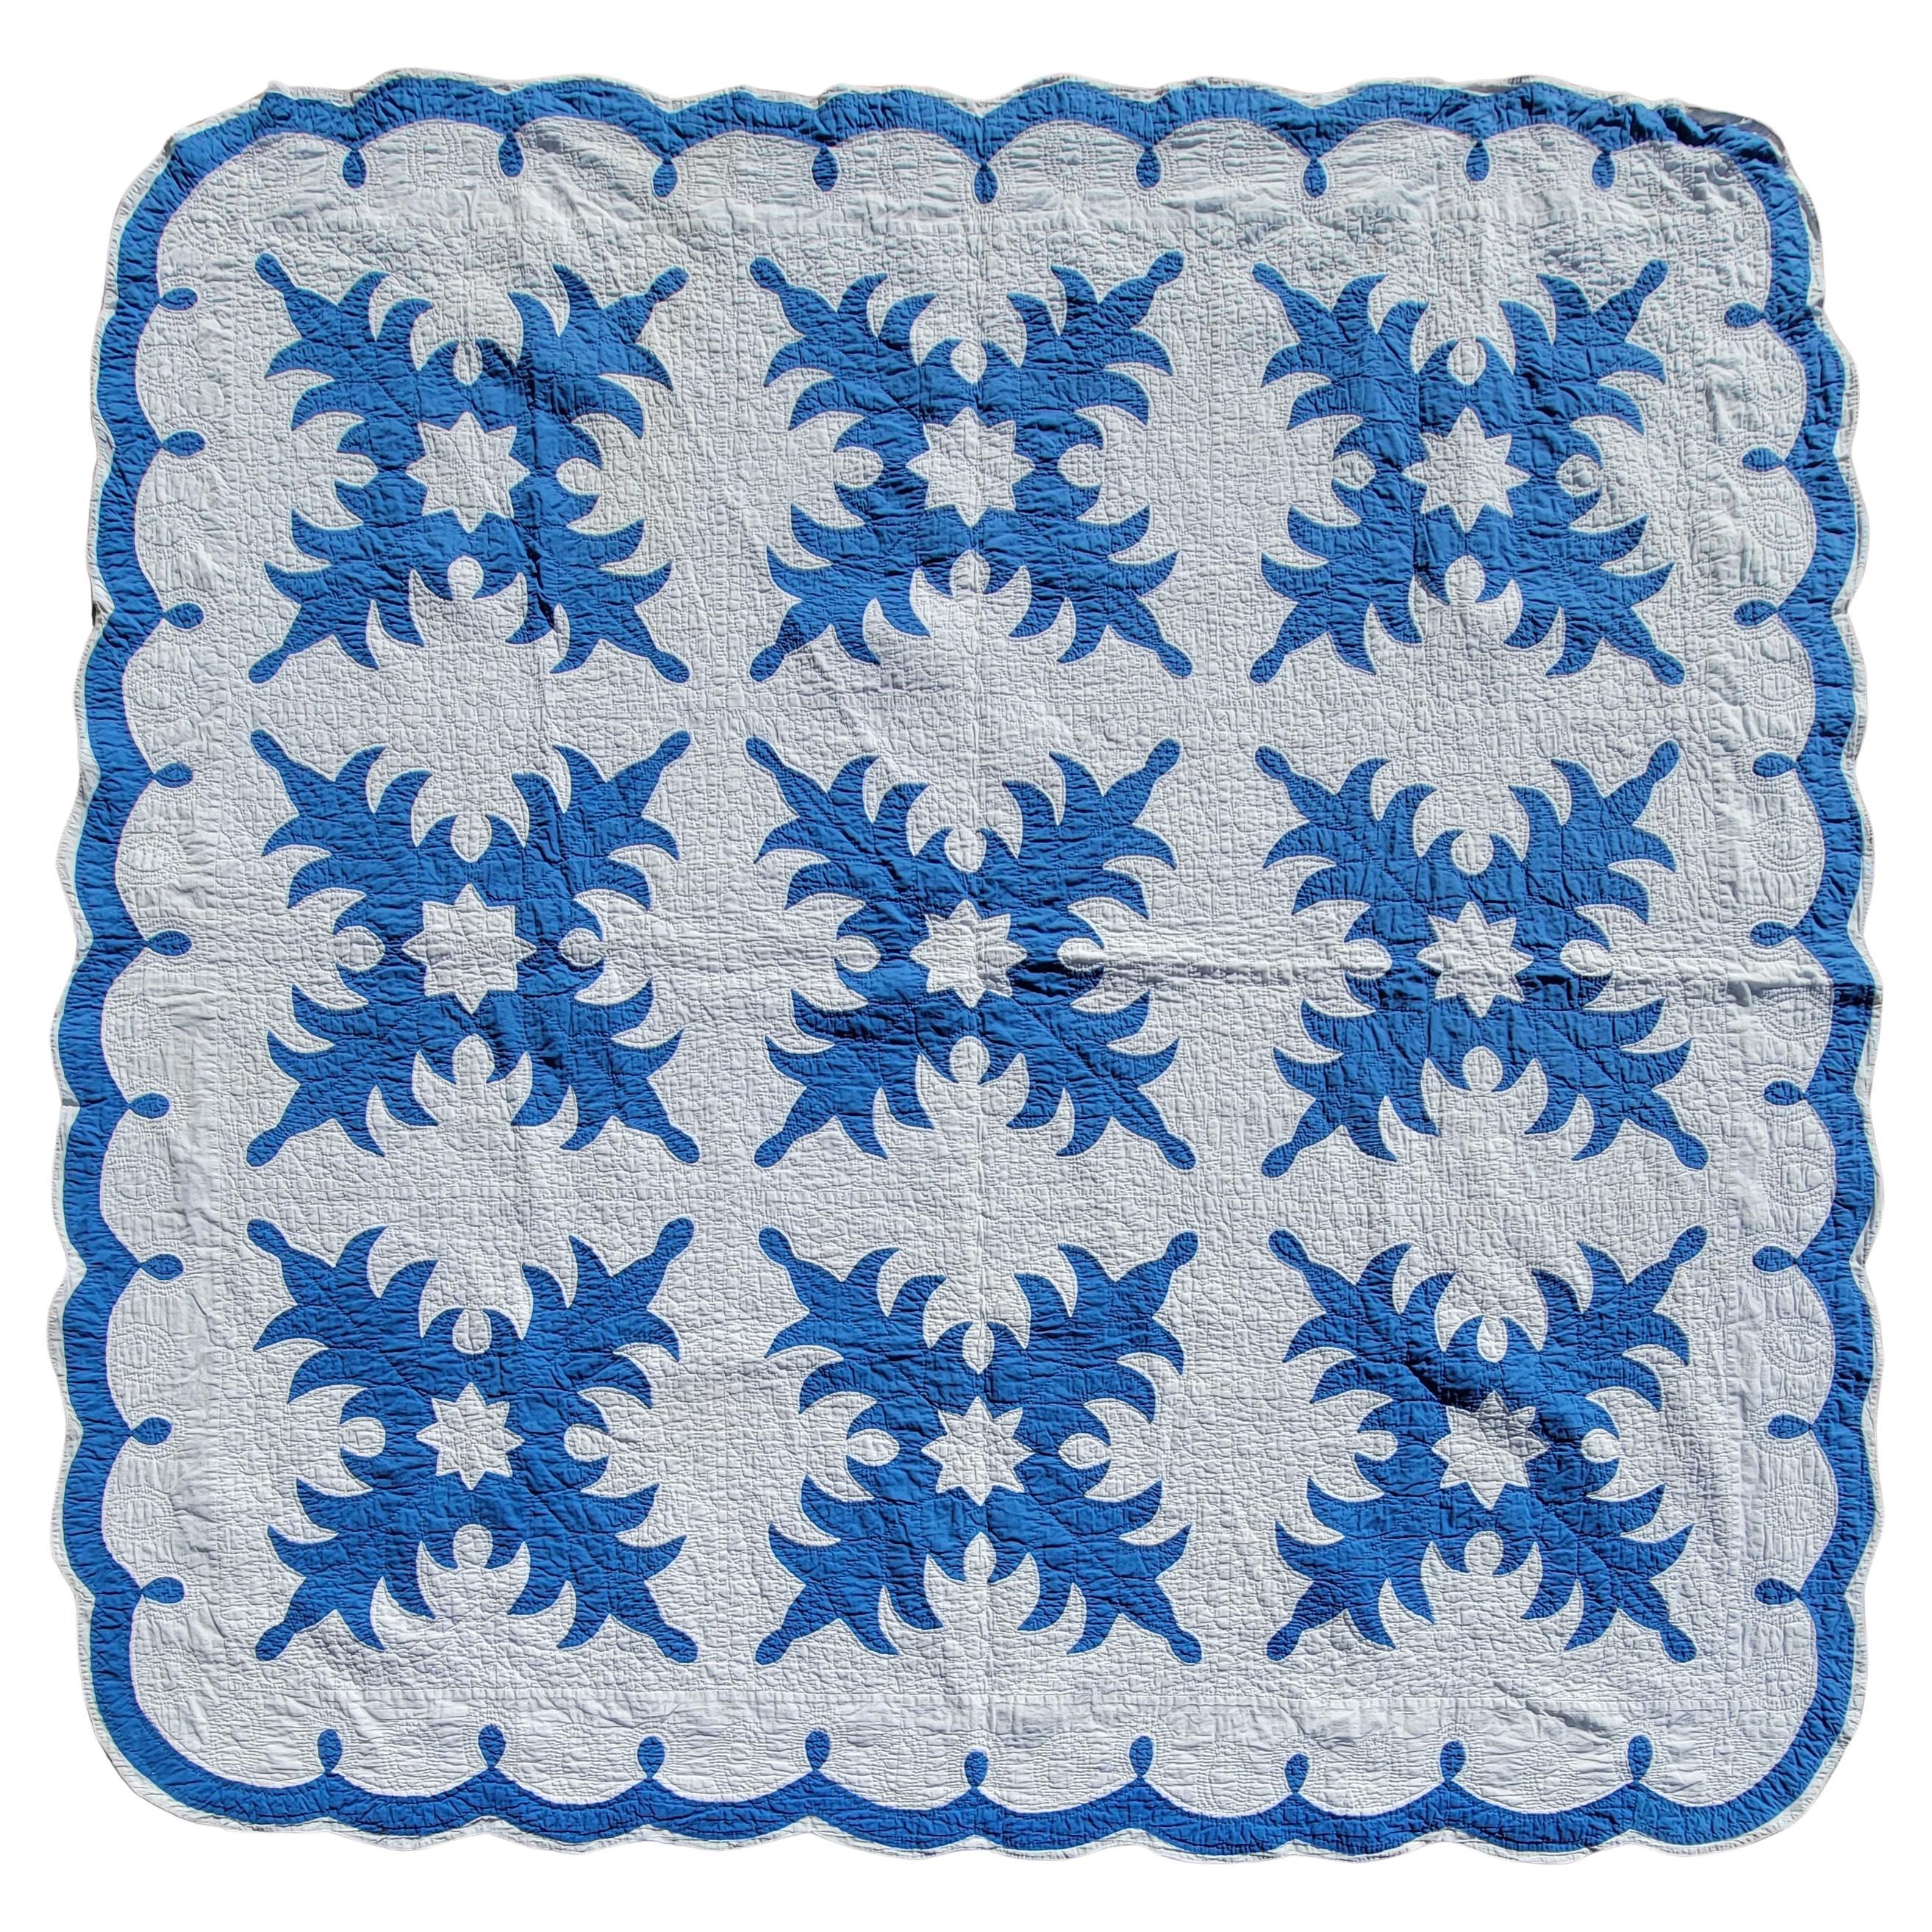 Early 20Thc Blue & White Applique Snow Flake Quilt